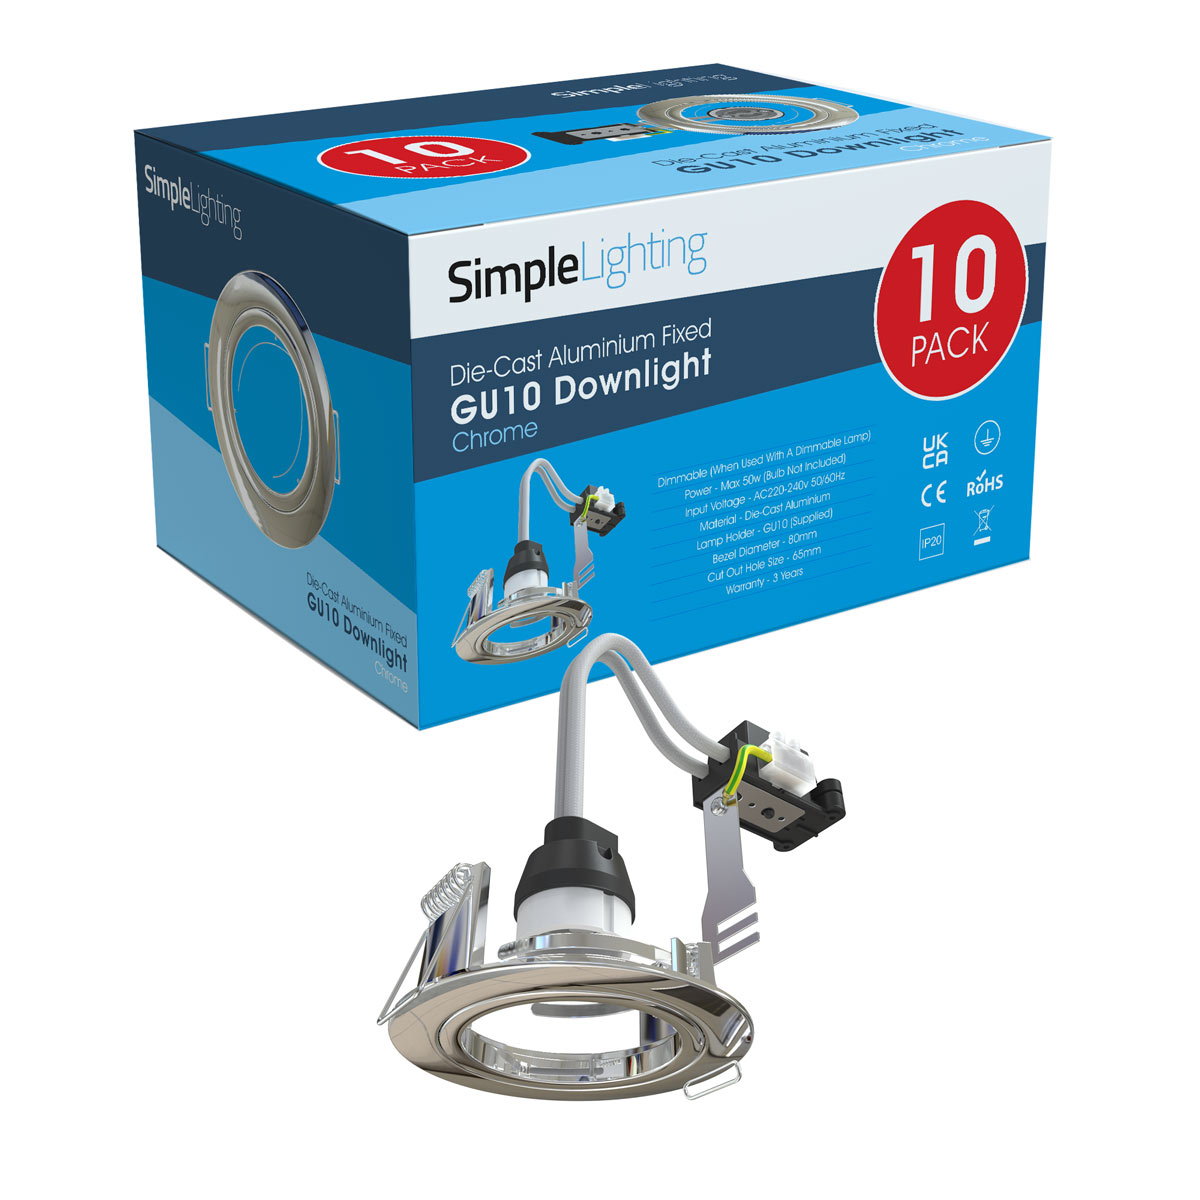 View Pack of 10 GU10 Downlight Fixed Die Cast in a Chrome Finish information